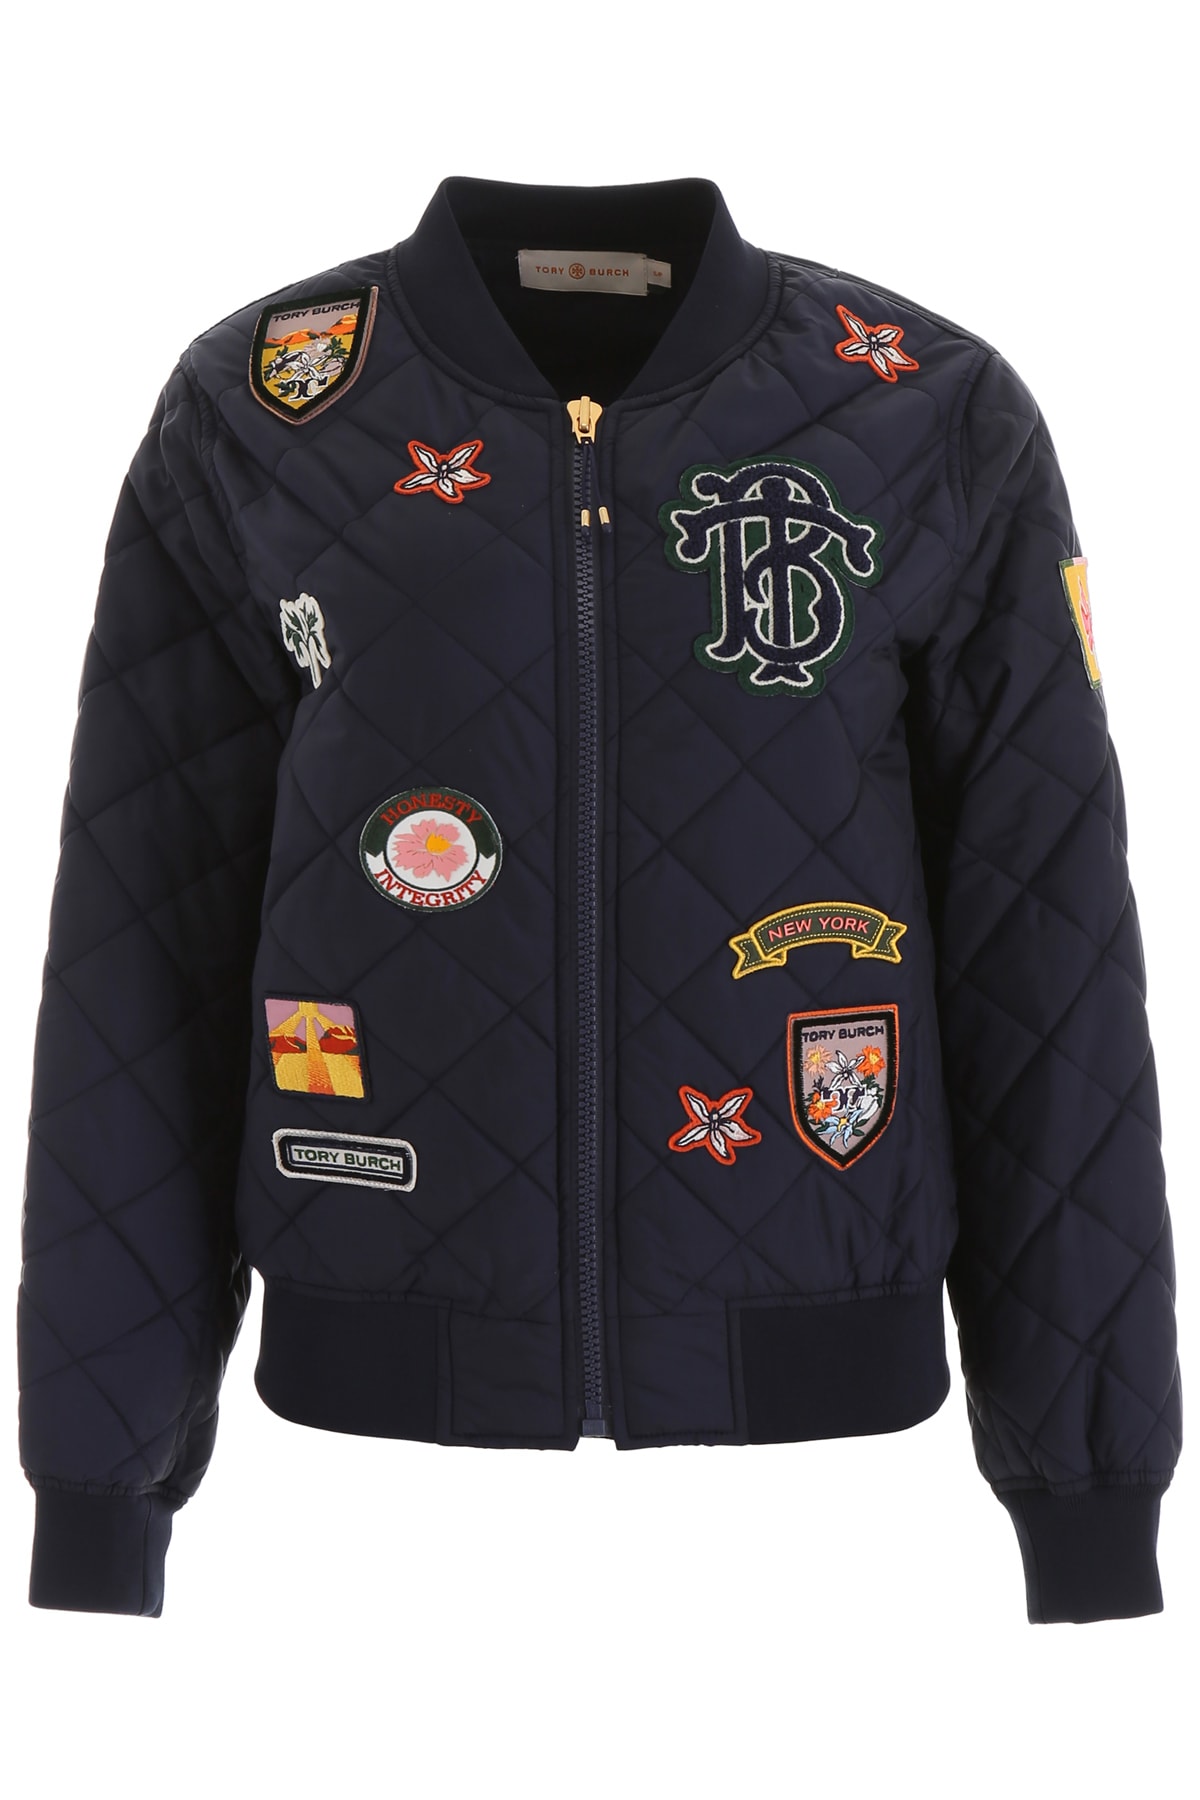 Tory Burch Embroidered Barn Jacket | Coshio Online Shop